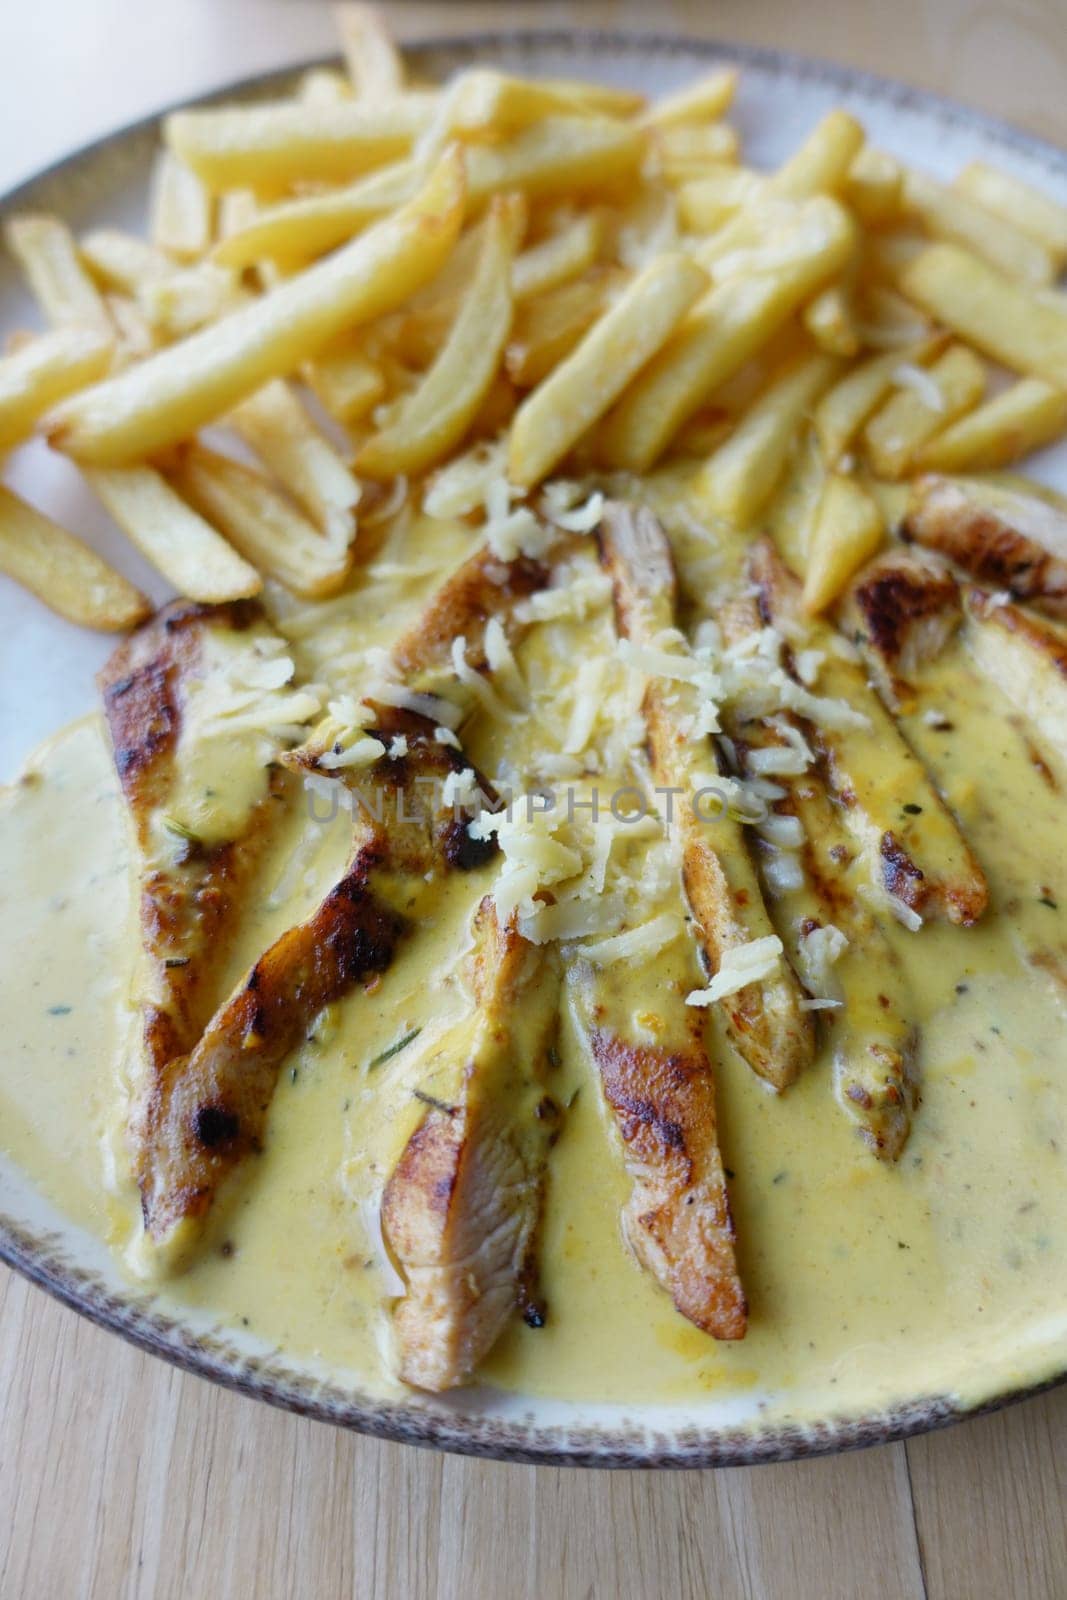 Ready to eat sliced chicken with cream sauce with french fries on a plate . by towfiq007